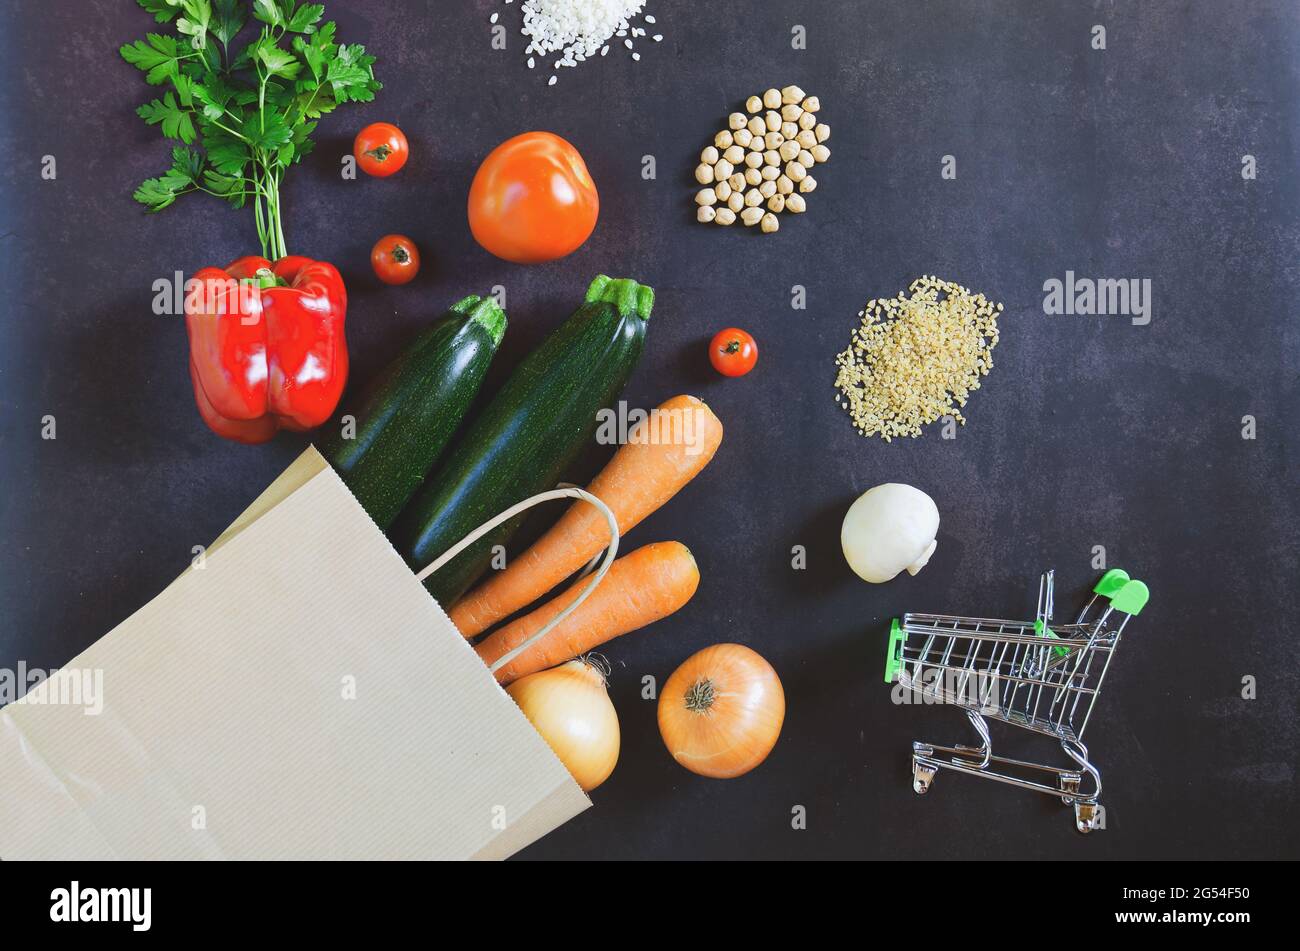 Shopping or delivery healthy food concept. Food supermarket and clean vegan eating concept. Fresh vegetables, fruit: in paper bag on black background Stock Photo